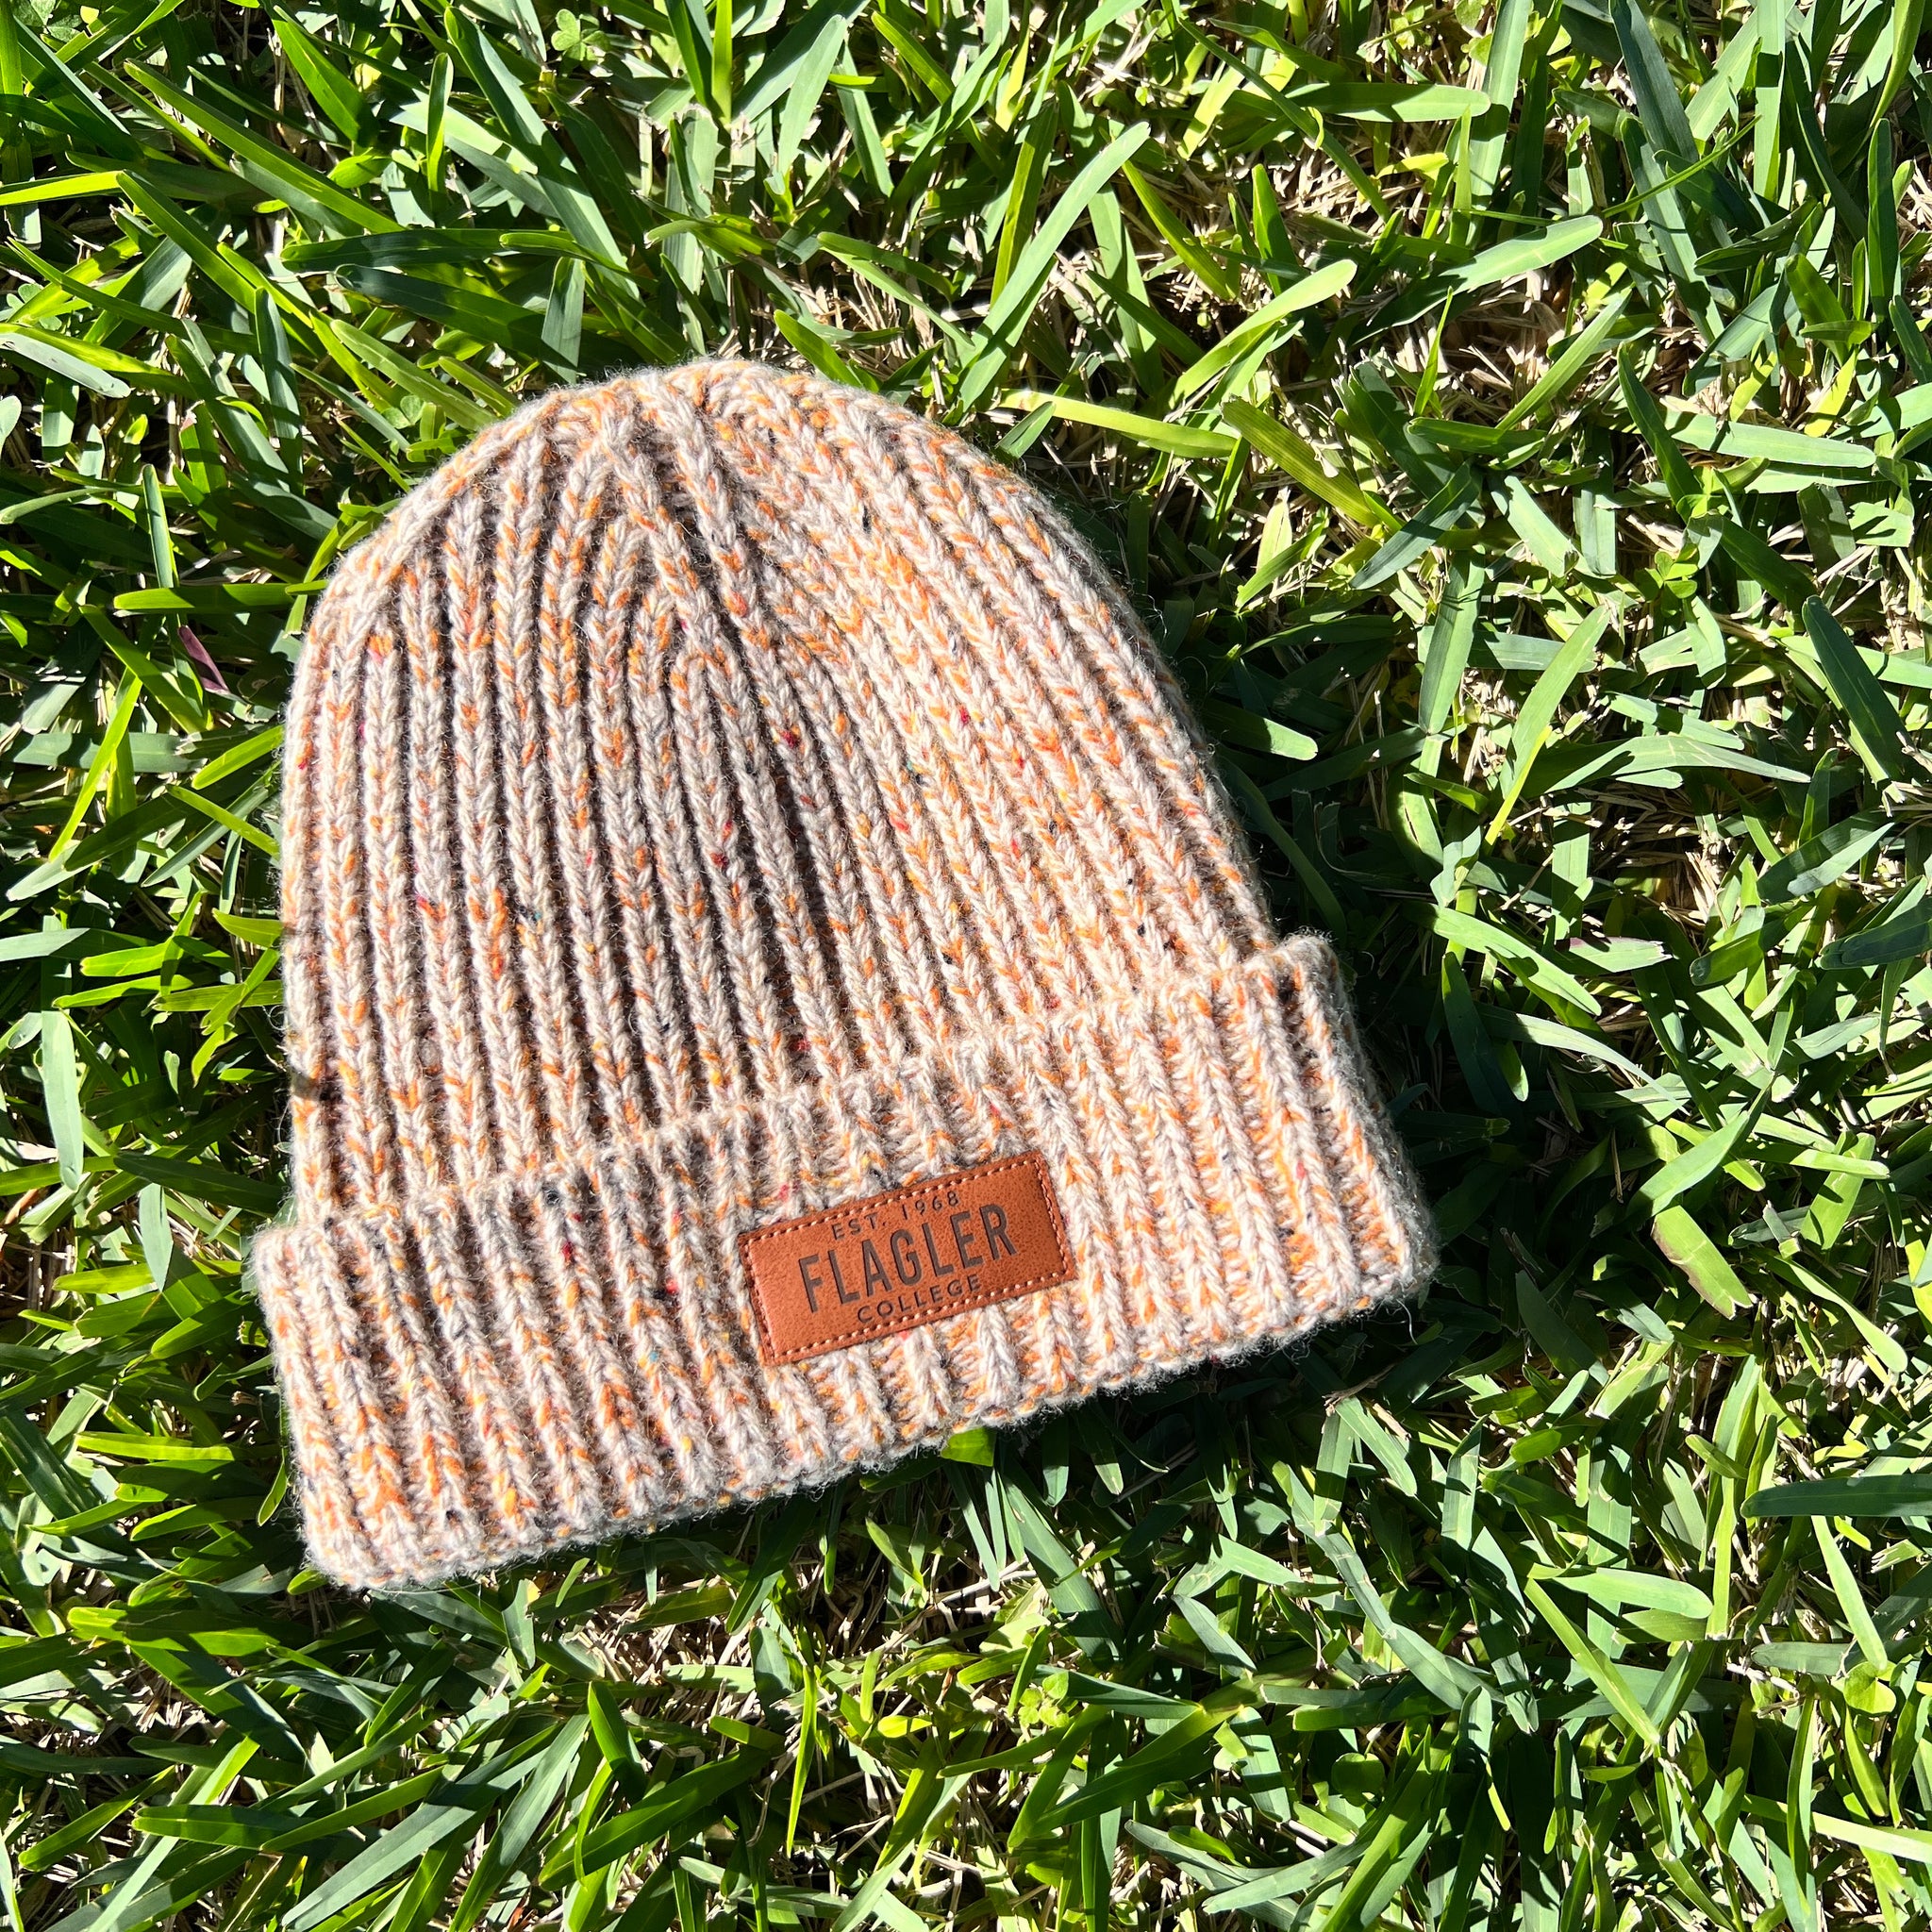 Tan fleck beanie with patch on cuff saying est 1968 over Flagler over College